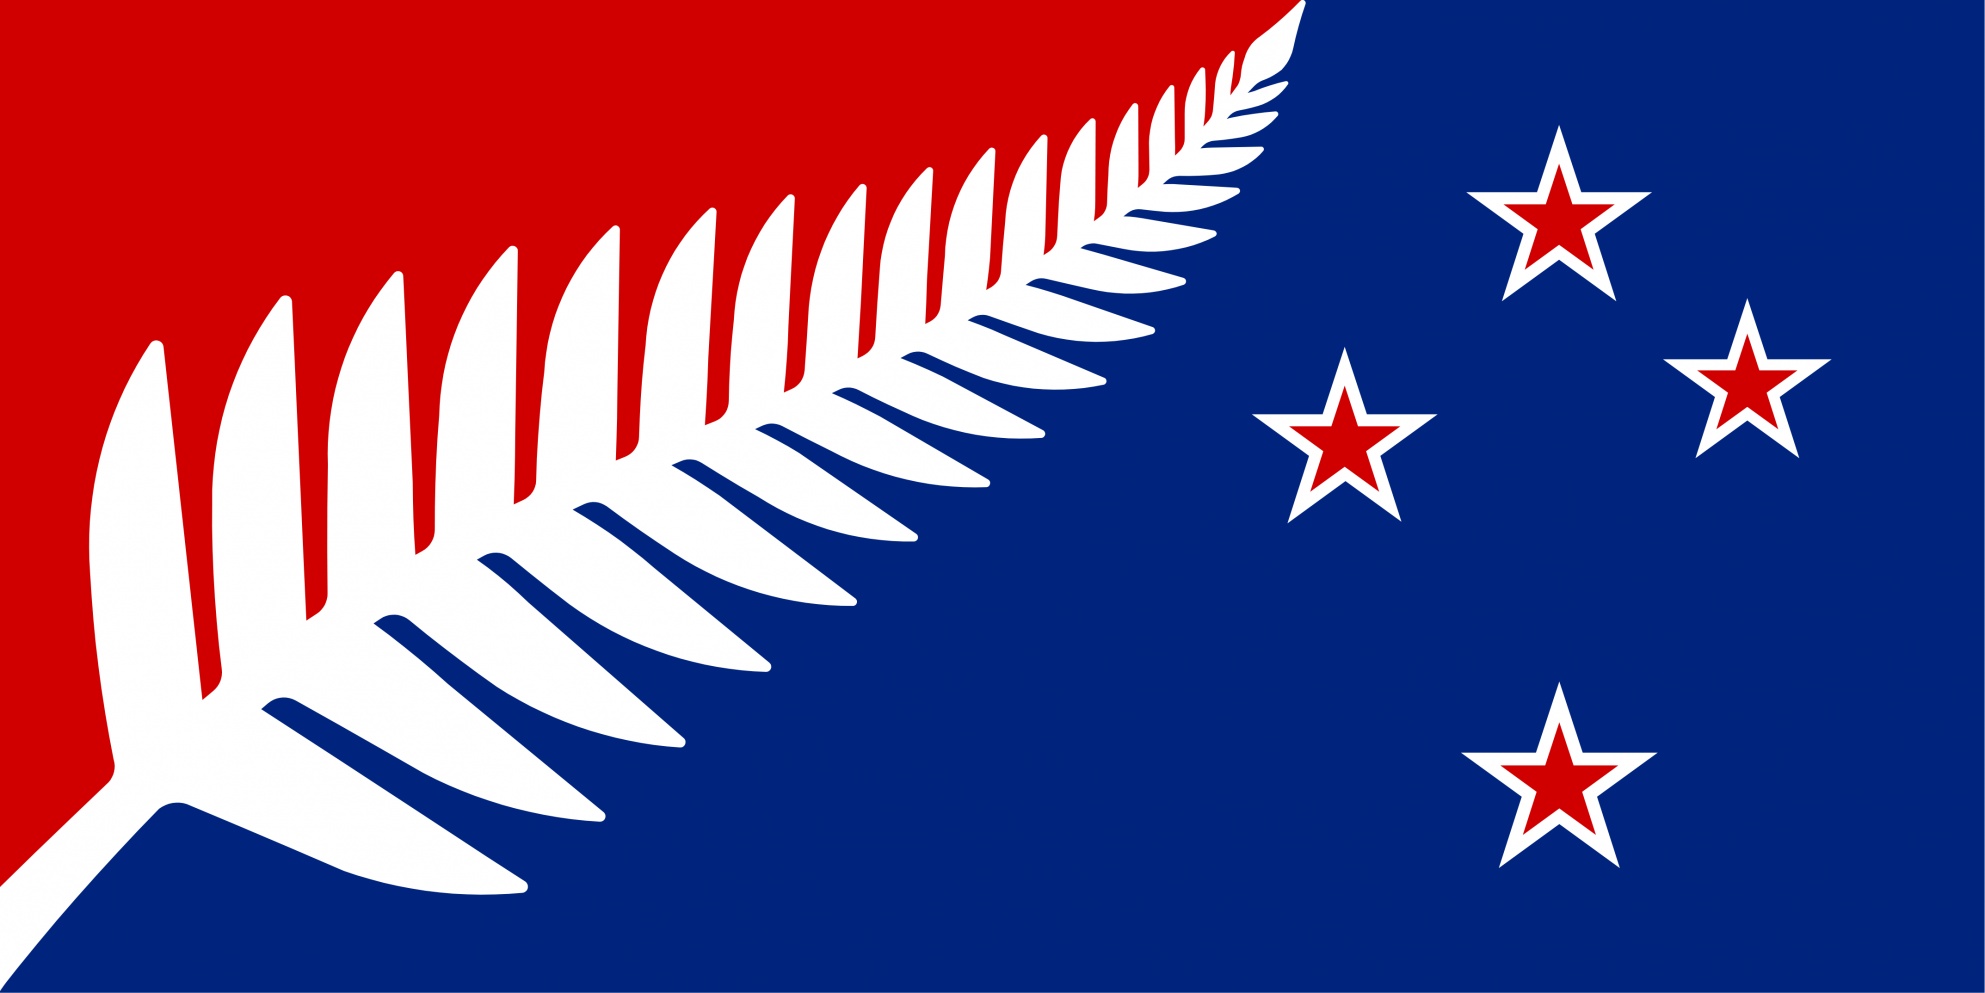 Download New Zealand Flag Picture HQ PNG Image FreePNGImg